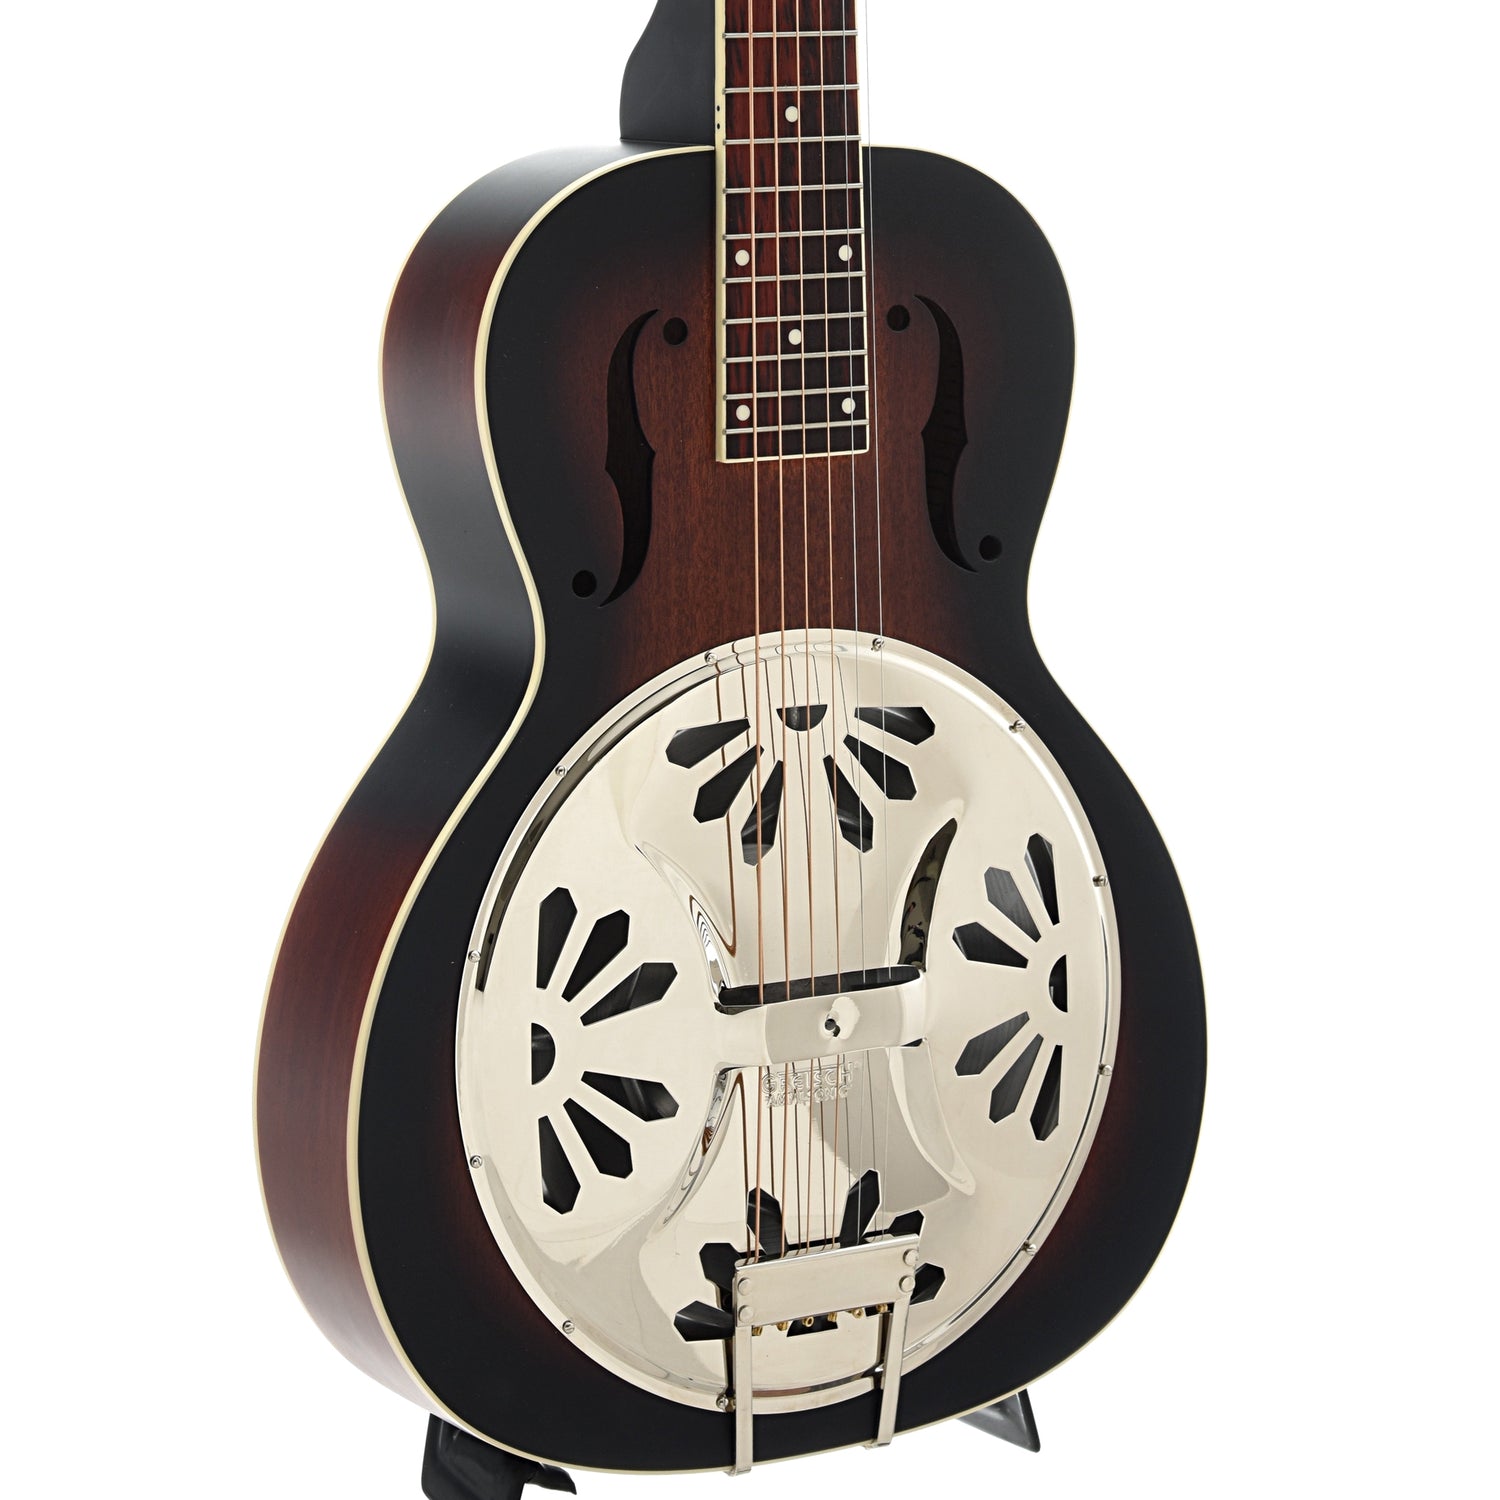 Front and Side of Gretsch Ampli-Sonic G9230 Bobtail Deluxe Squareneck Resonator Guitar